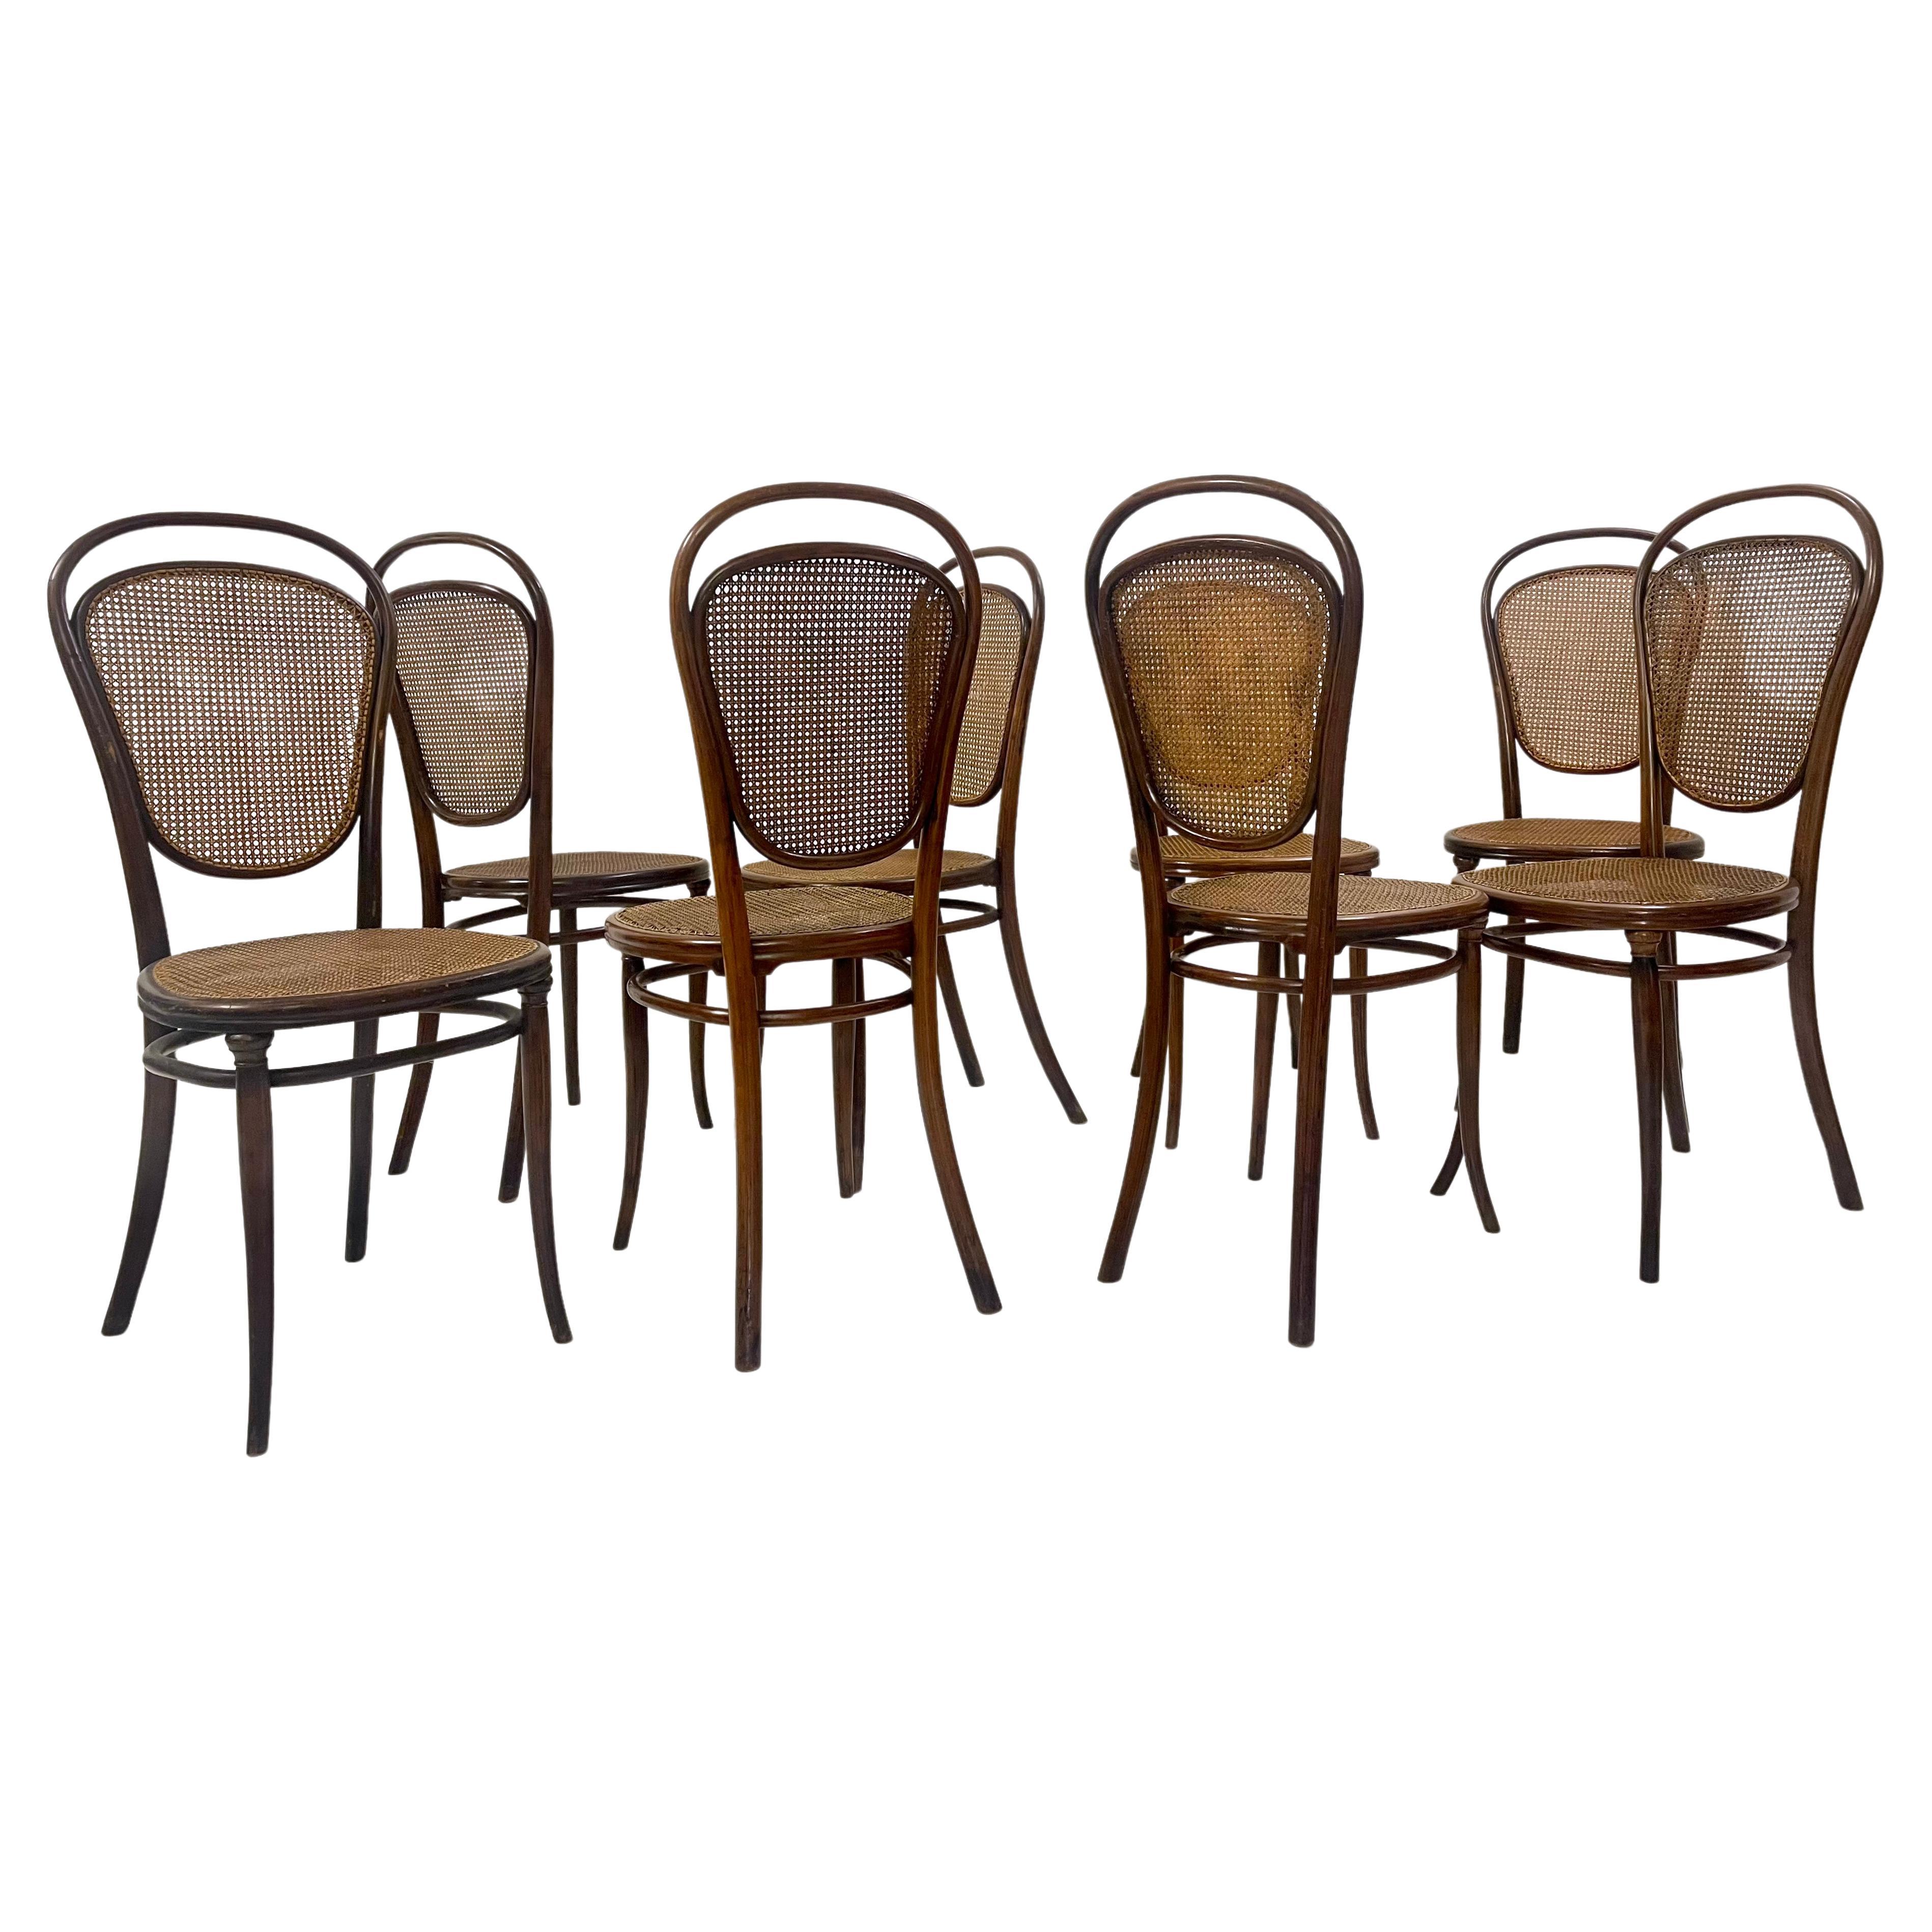 Set of 8 Bentwood Caning Chairs by Thonet, Austria 1930s